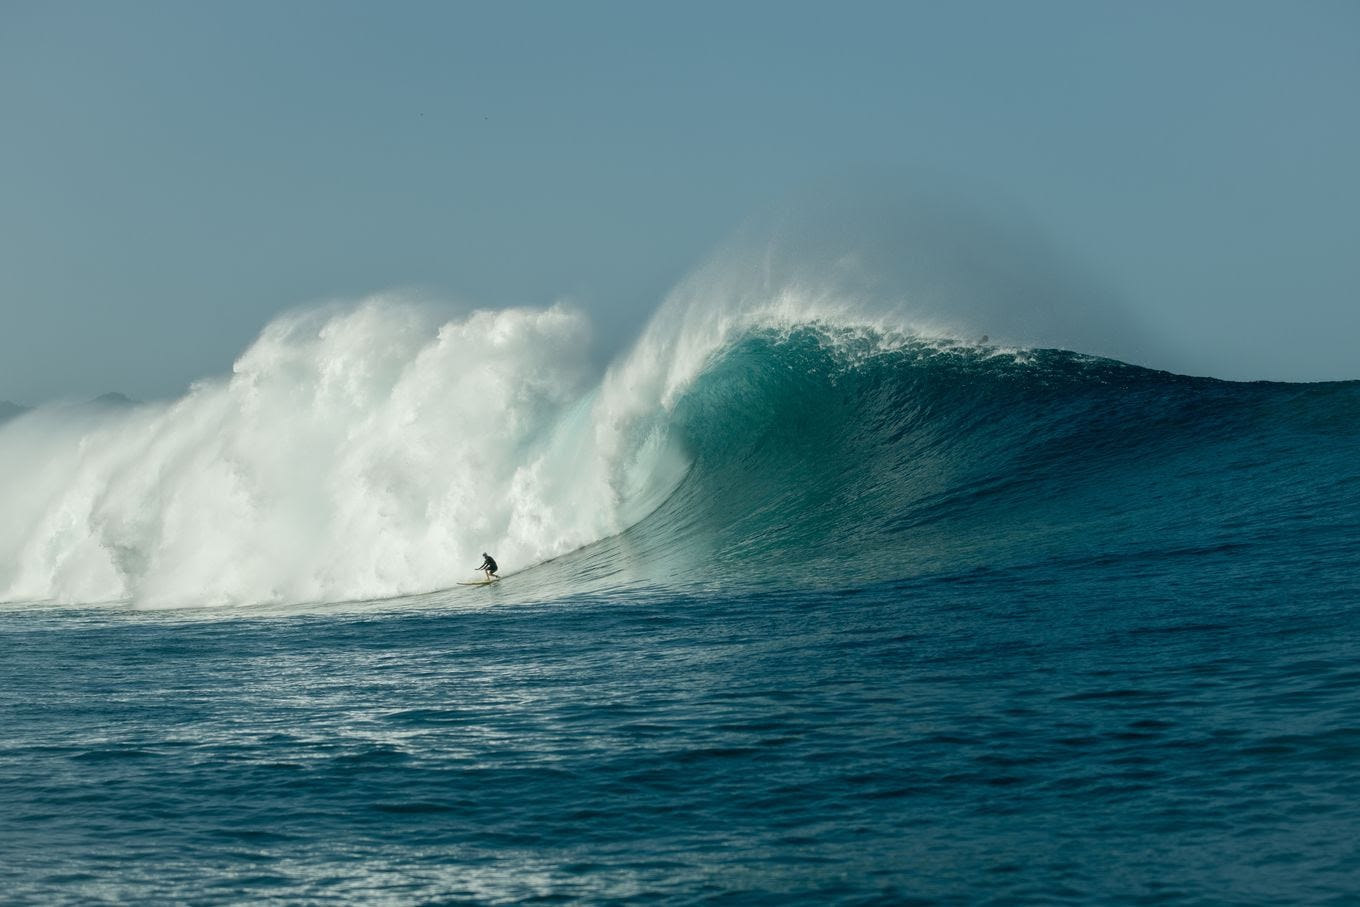 Laura Enever rides the wave off Oahu’s North Shore. (Courtesy of Daniel Russo)